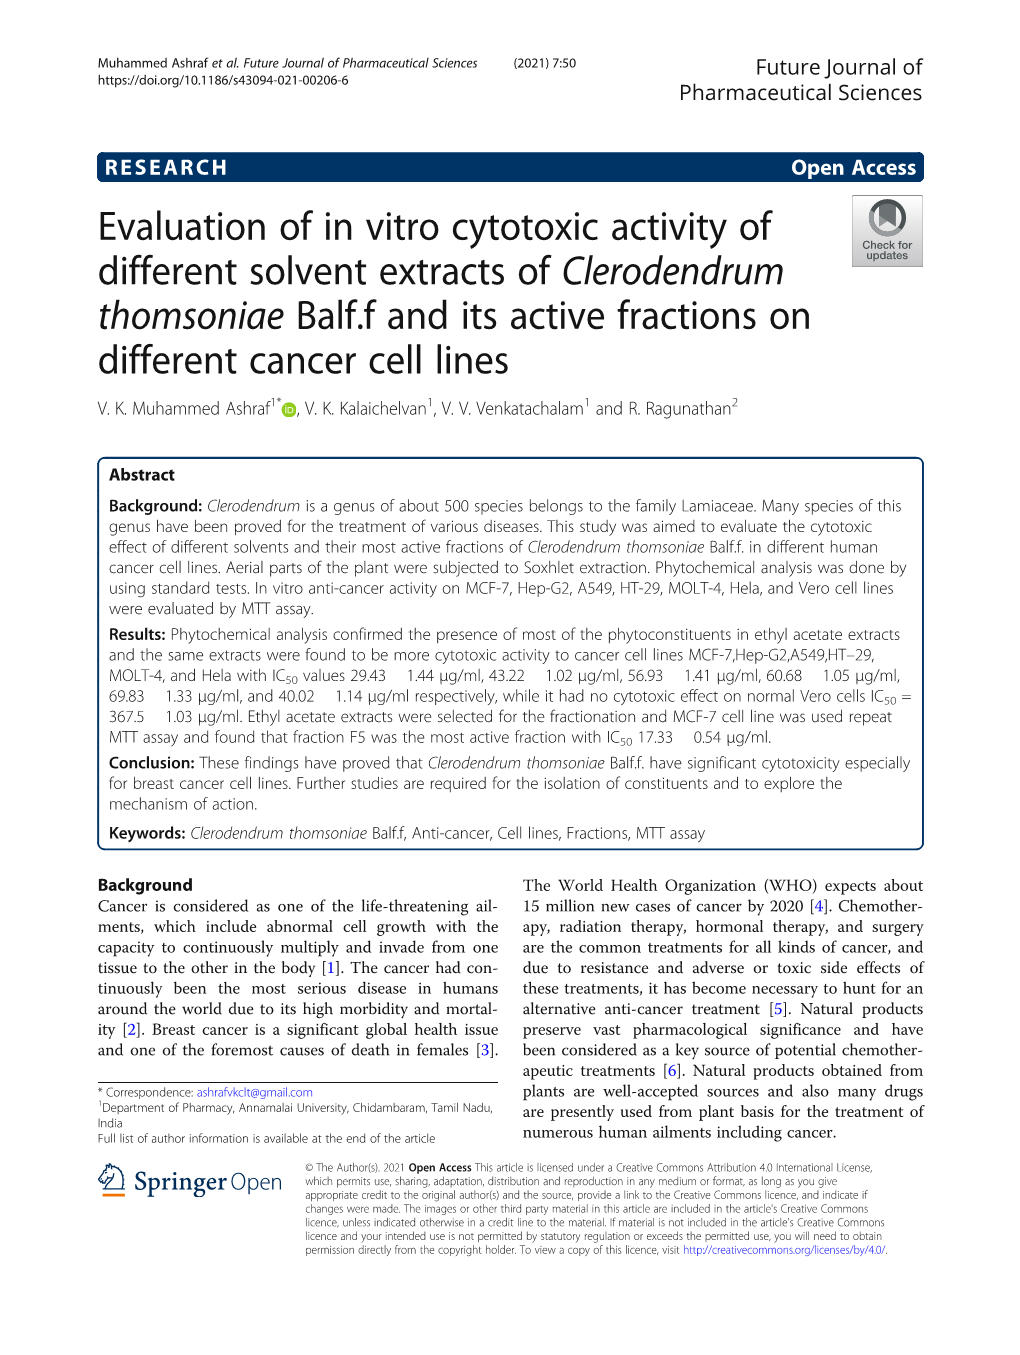 Evaluation of in Vitro Cytotoxic Activity of Different Solvent Extracts of Clerodendrum Thomsoniae Balf.F and Its Active Fractions on Different Cancer Cell Lines V